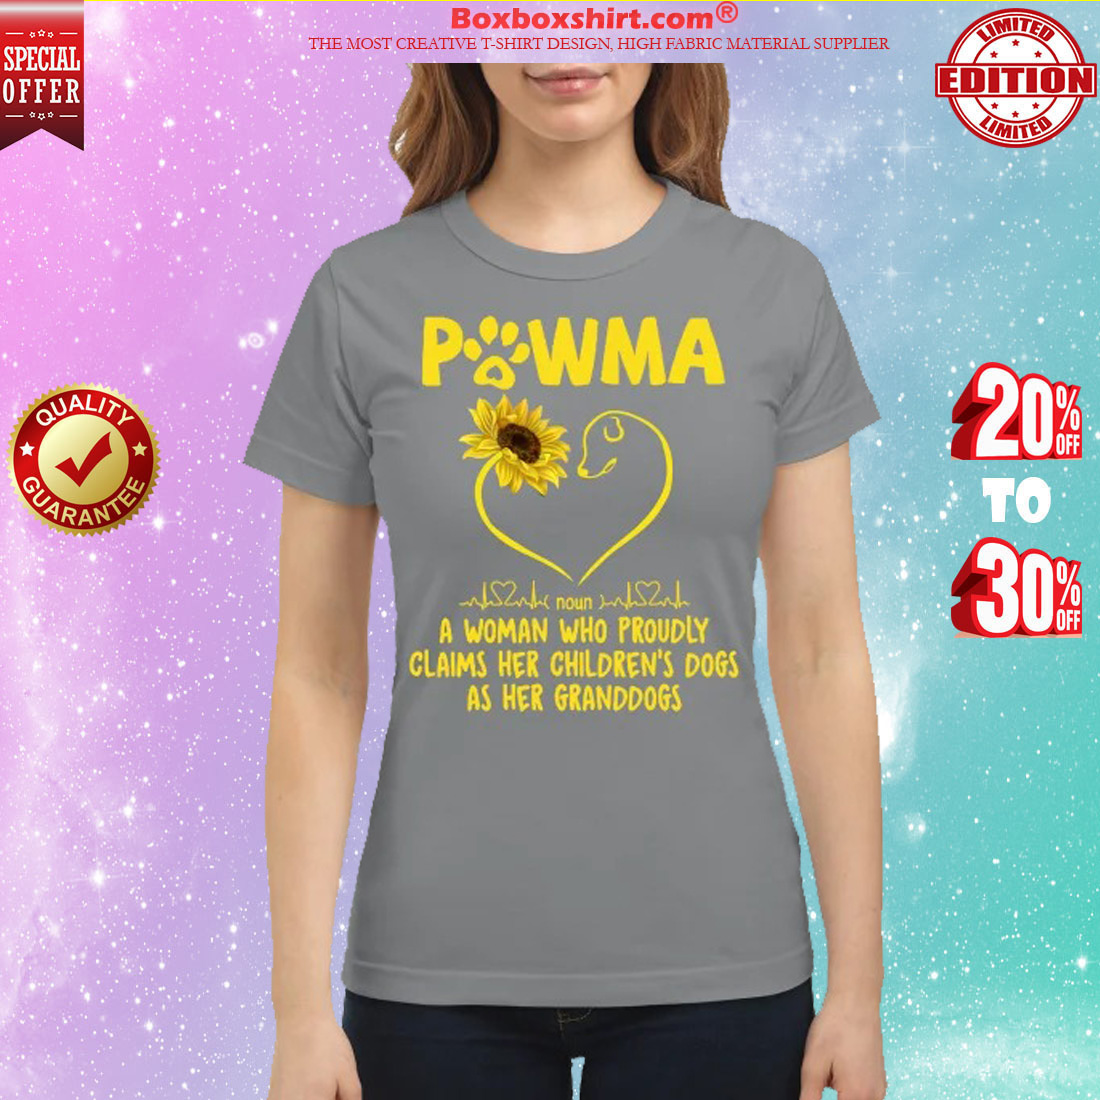 Pawma a woman who proudly claims her children dogs as her grandogs classic shirt